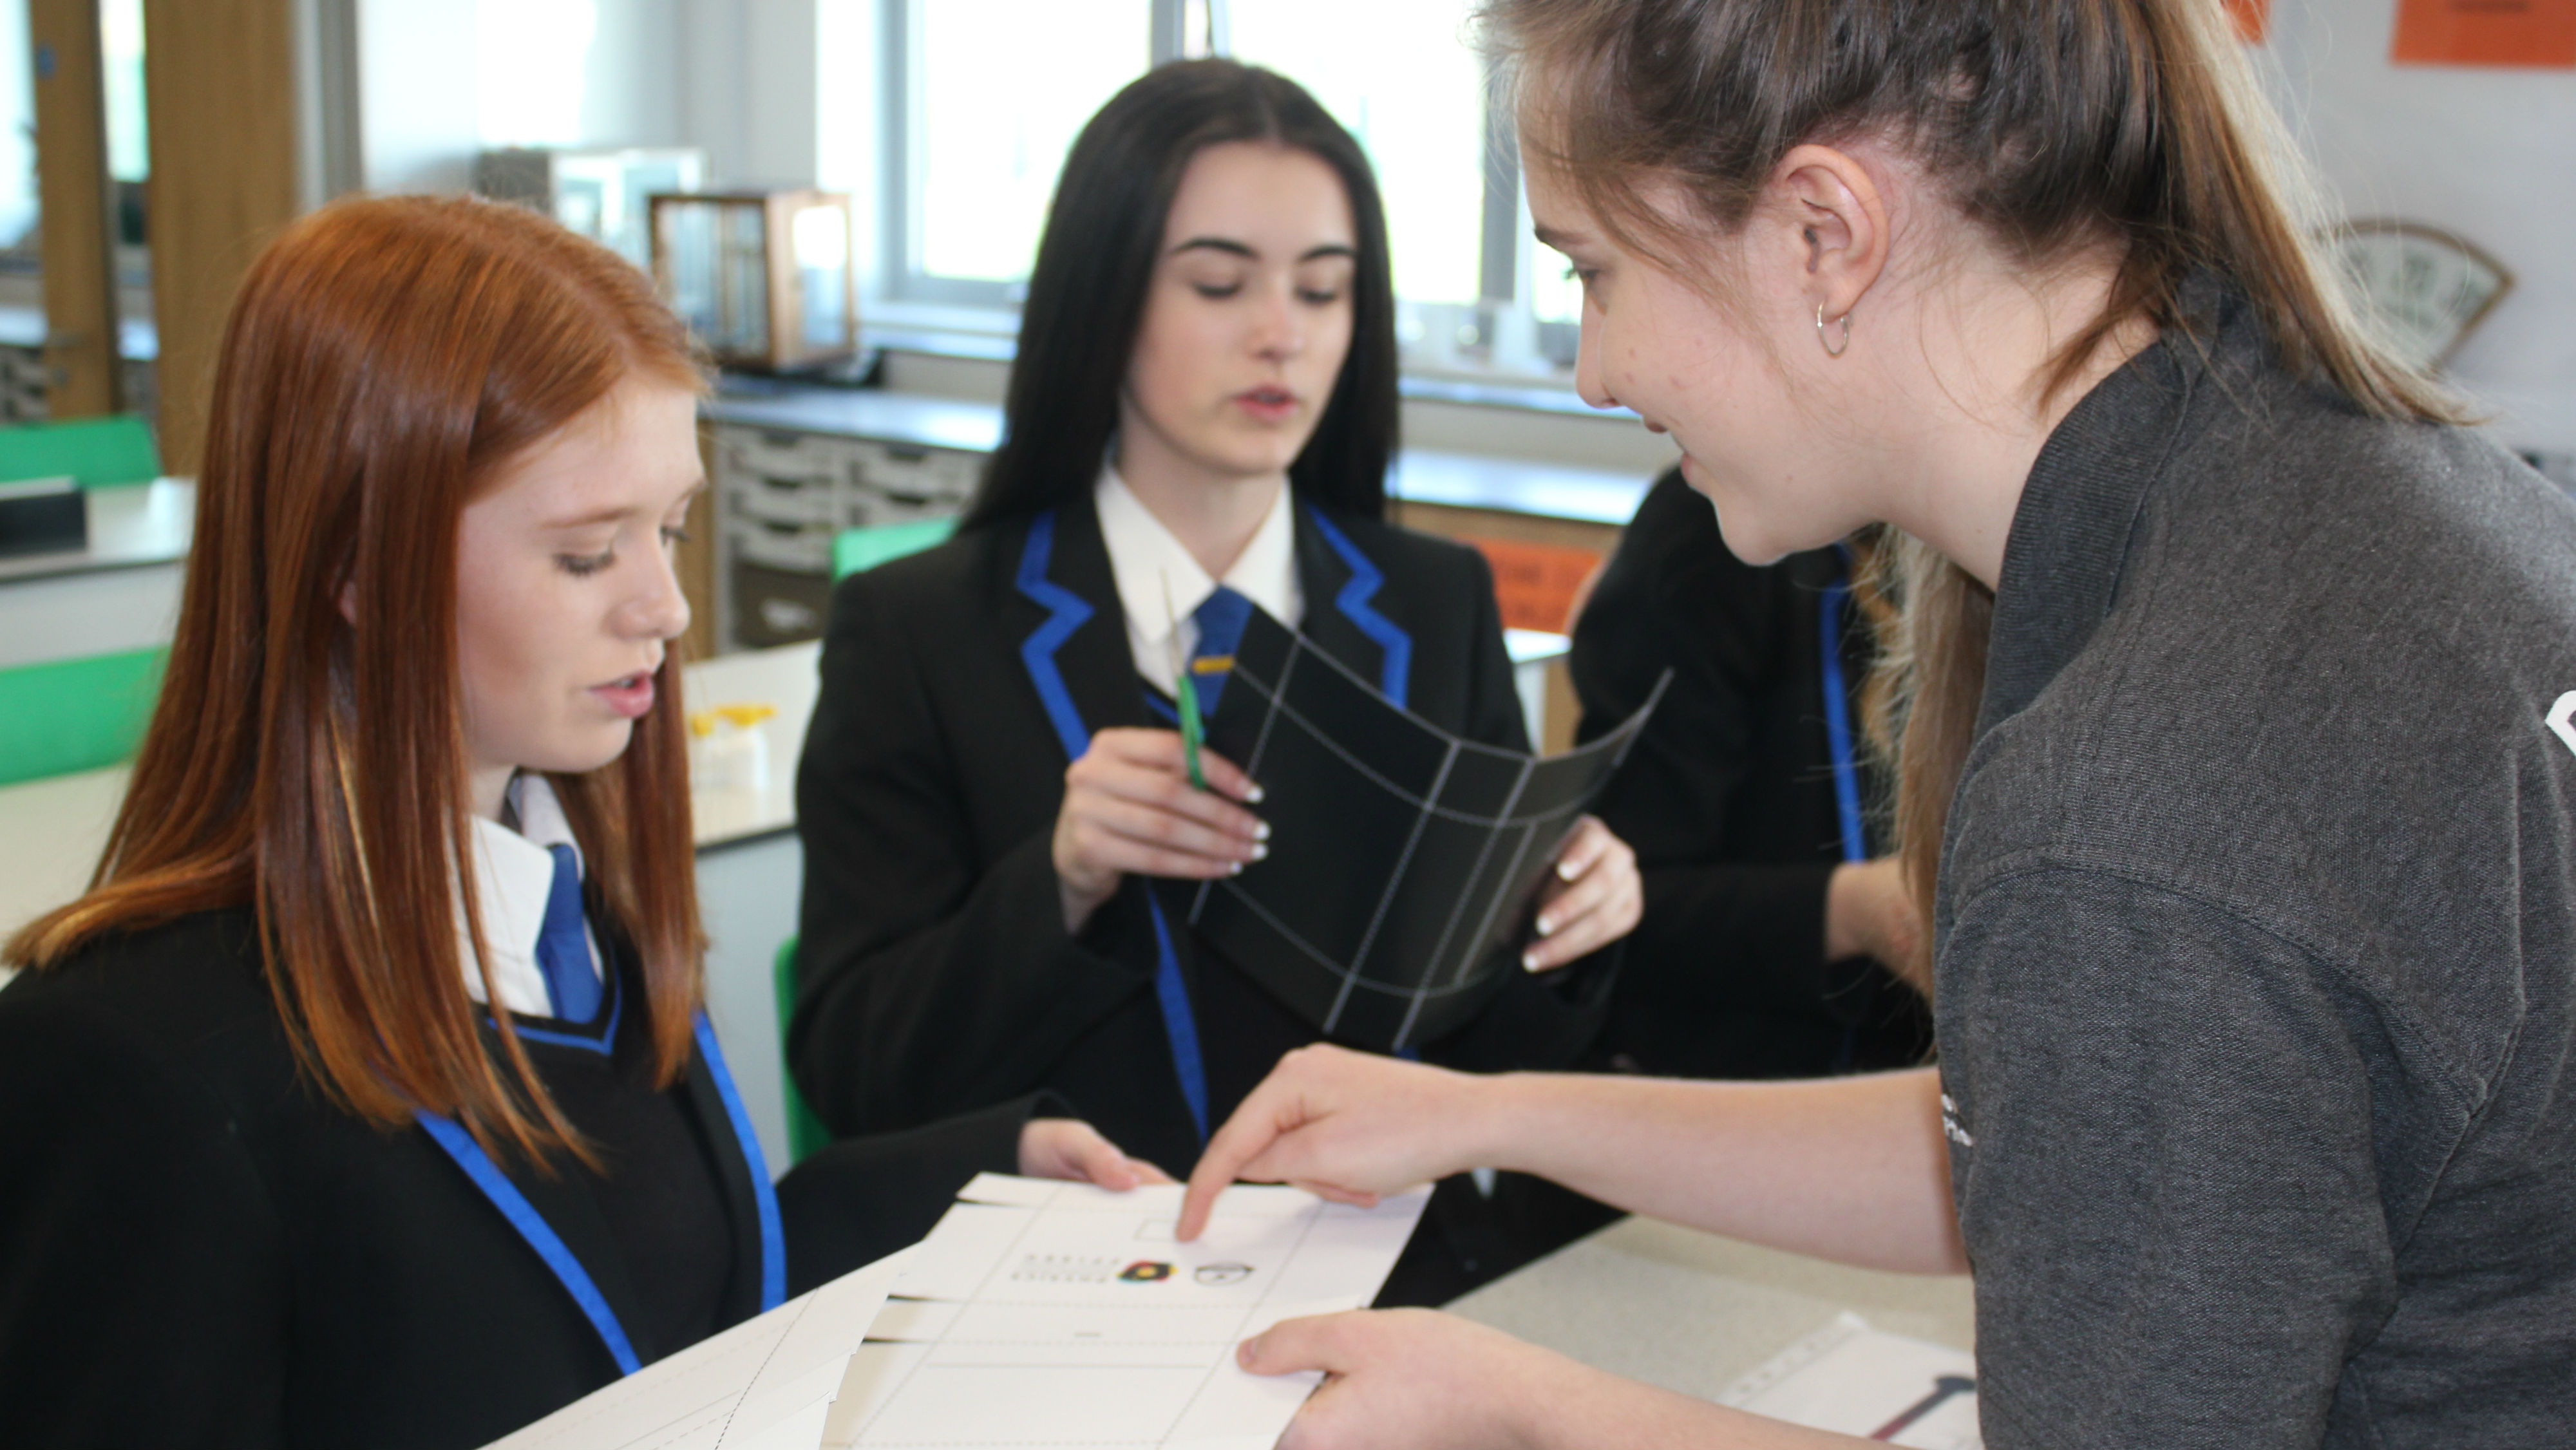 Students taking part in physics lesson